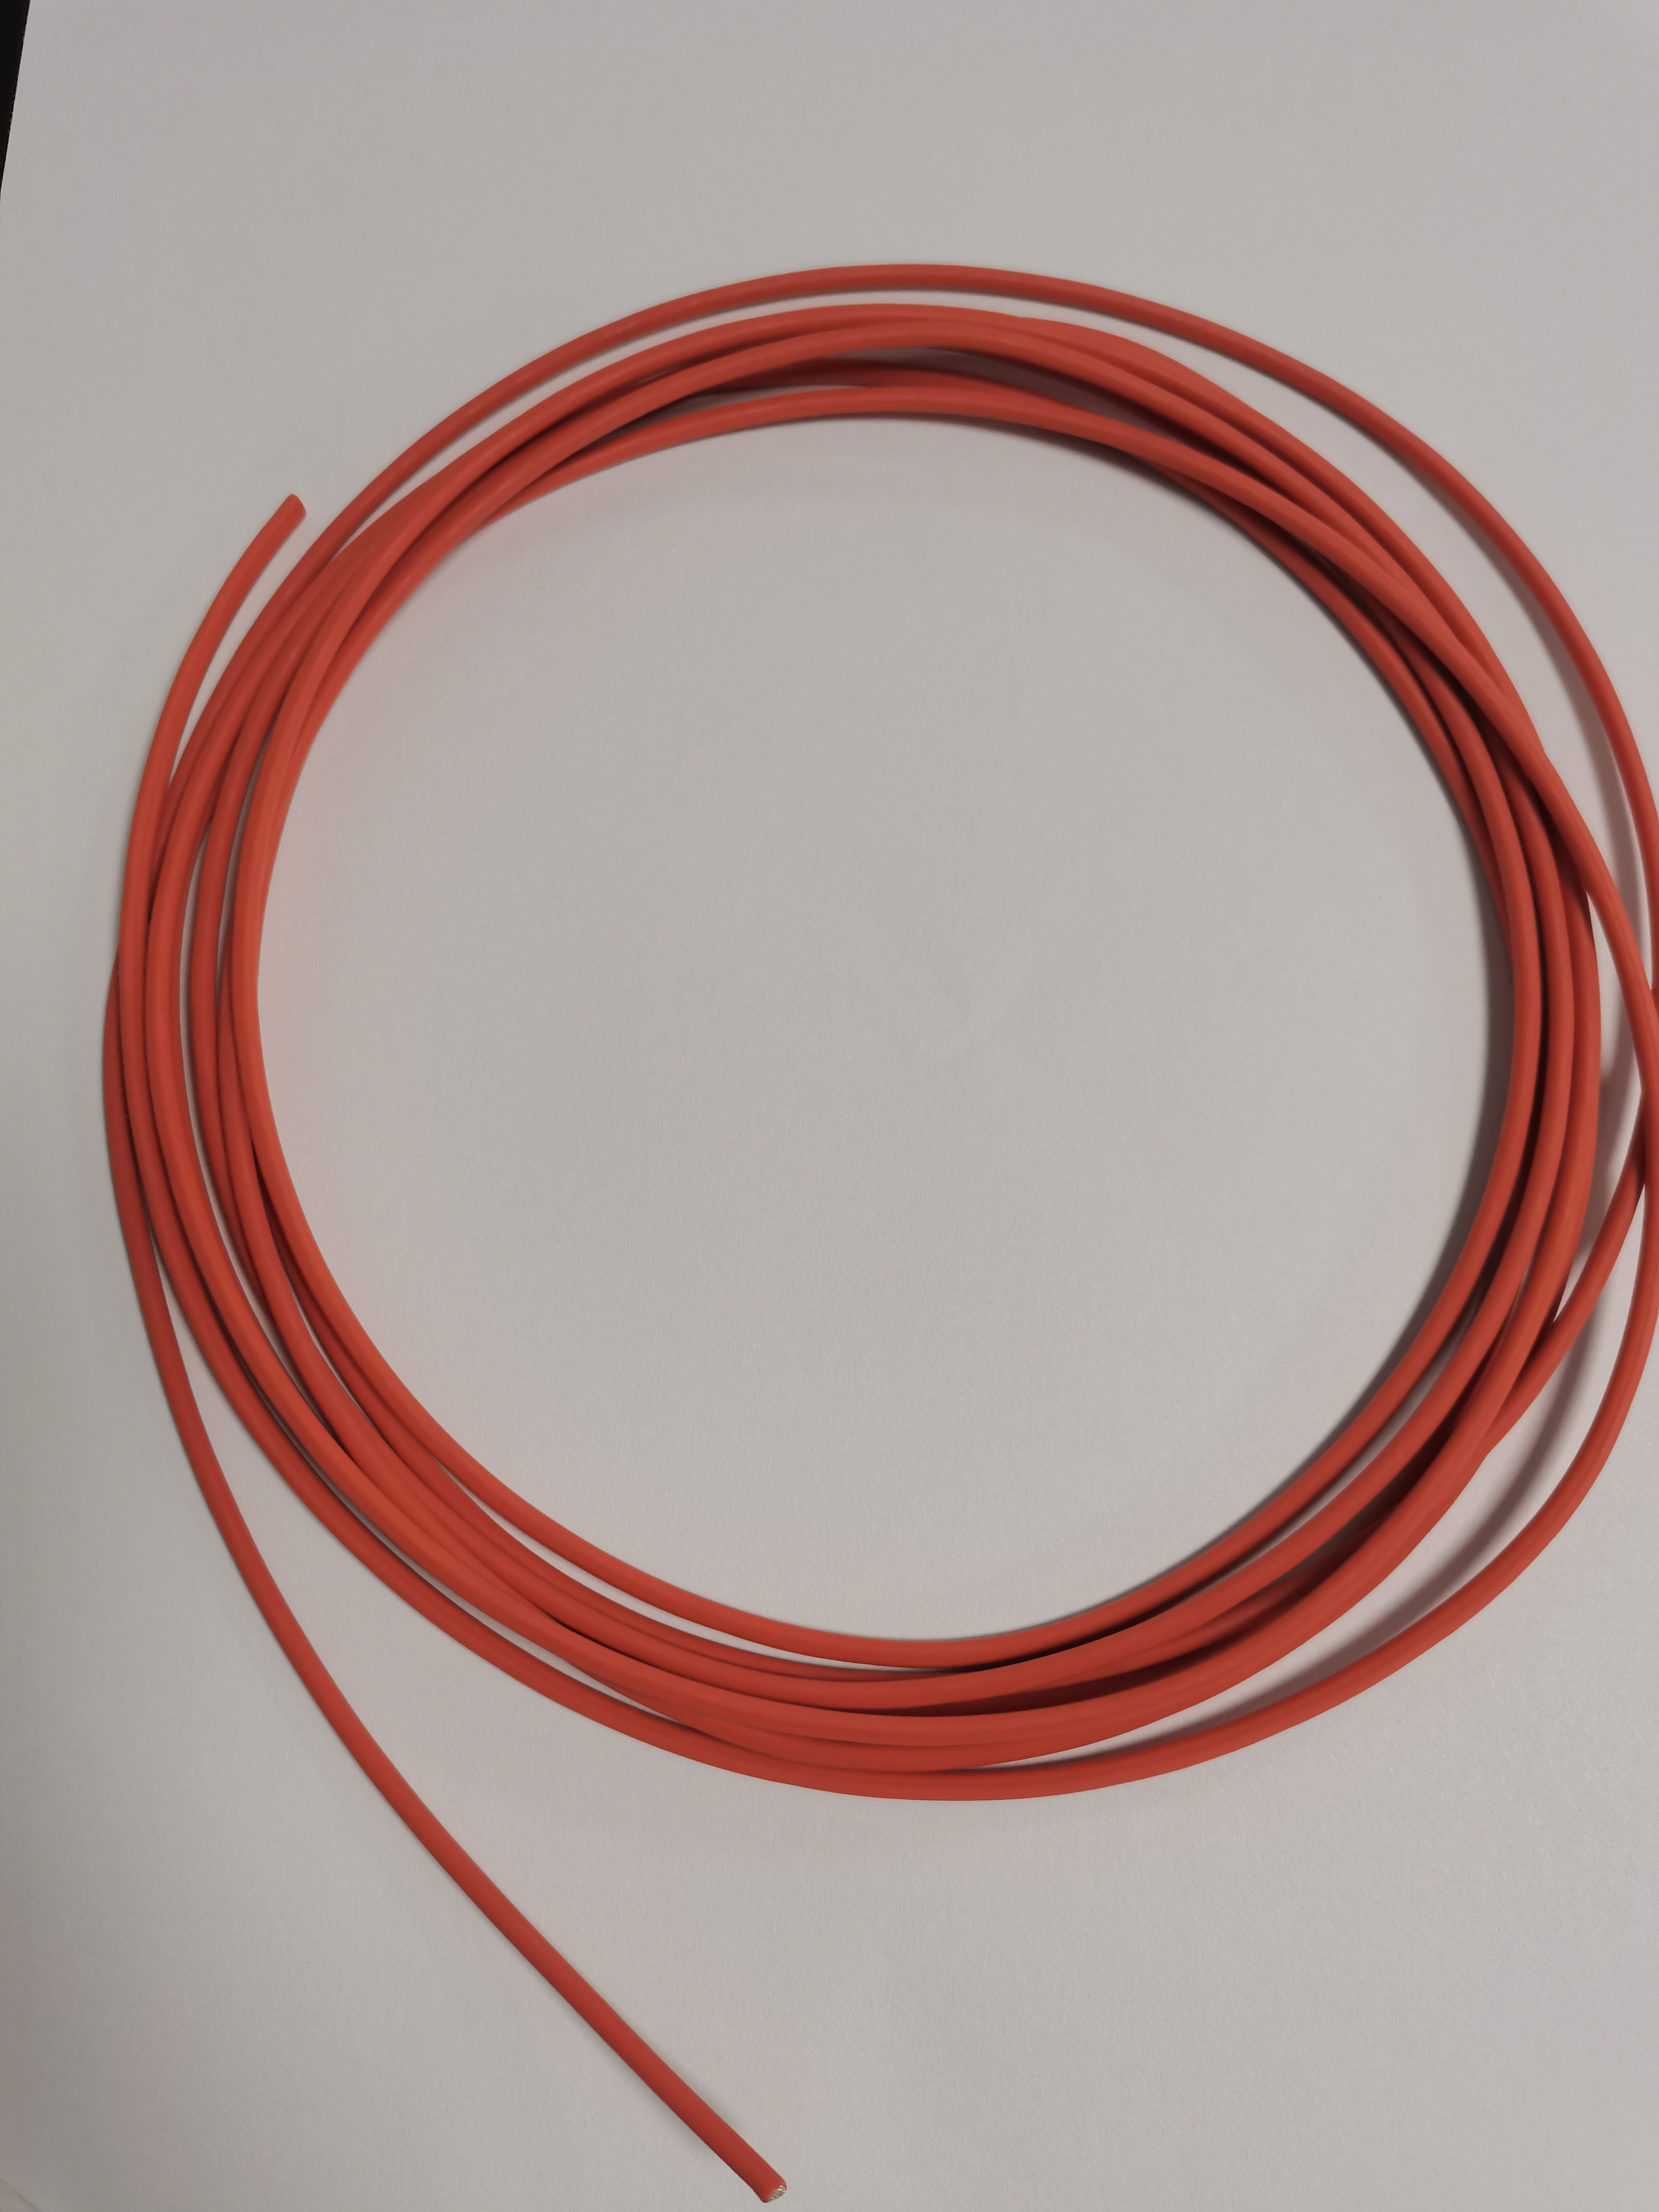  Oil cooled Motor Lead wire,new energy vehicle motor special wire cable,new energy motor wire cable